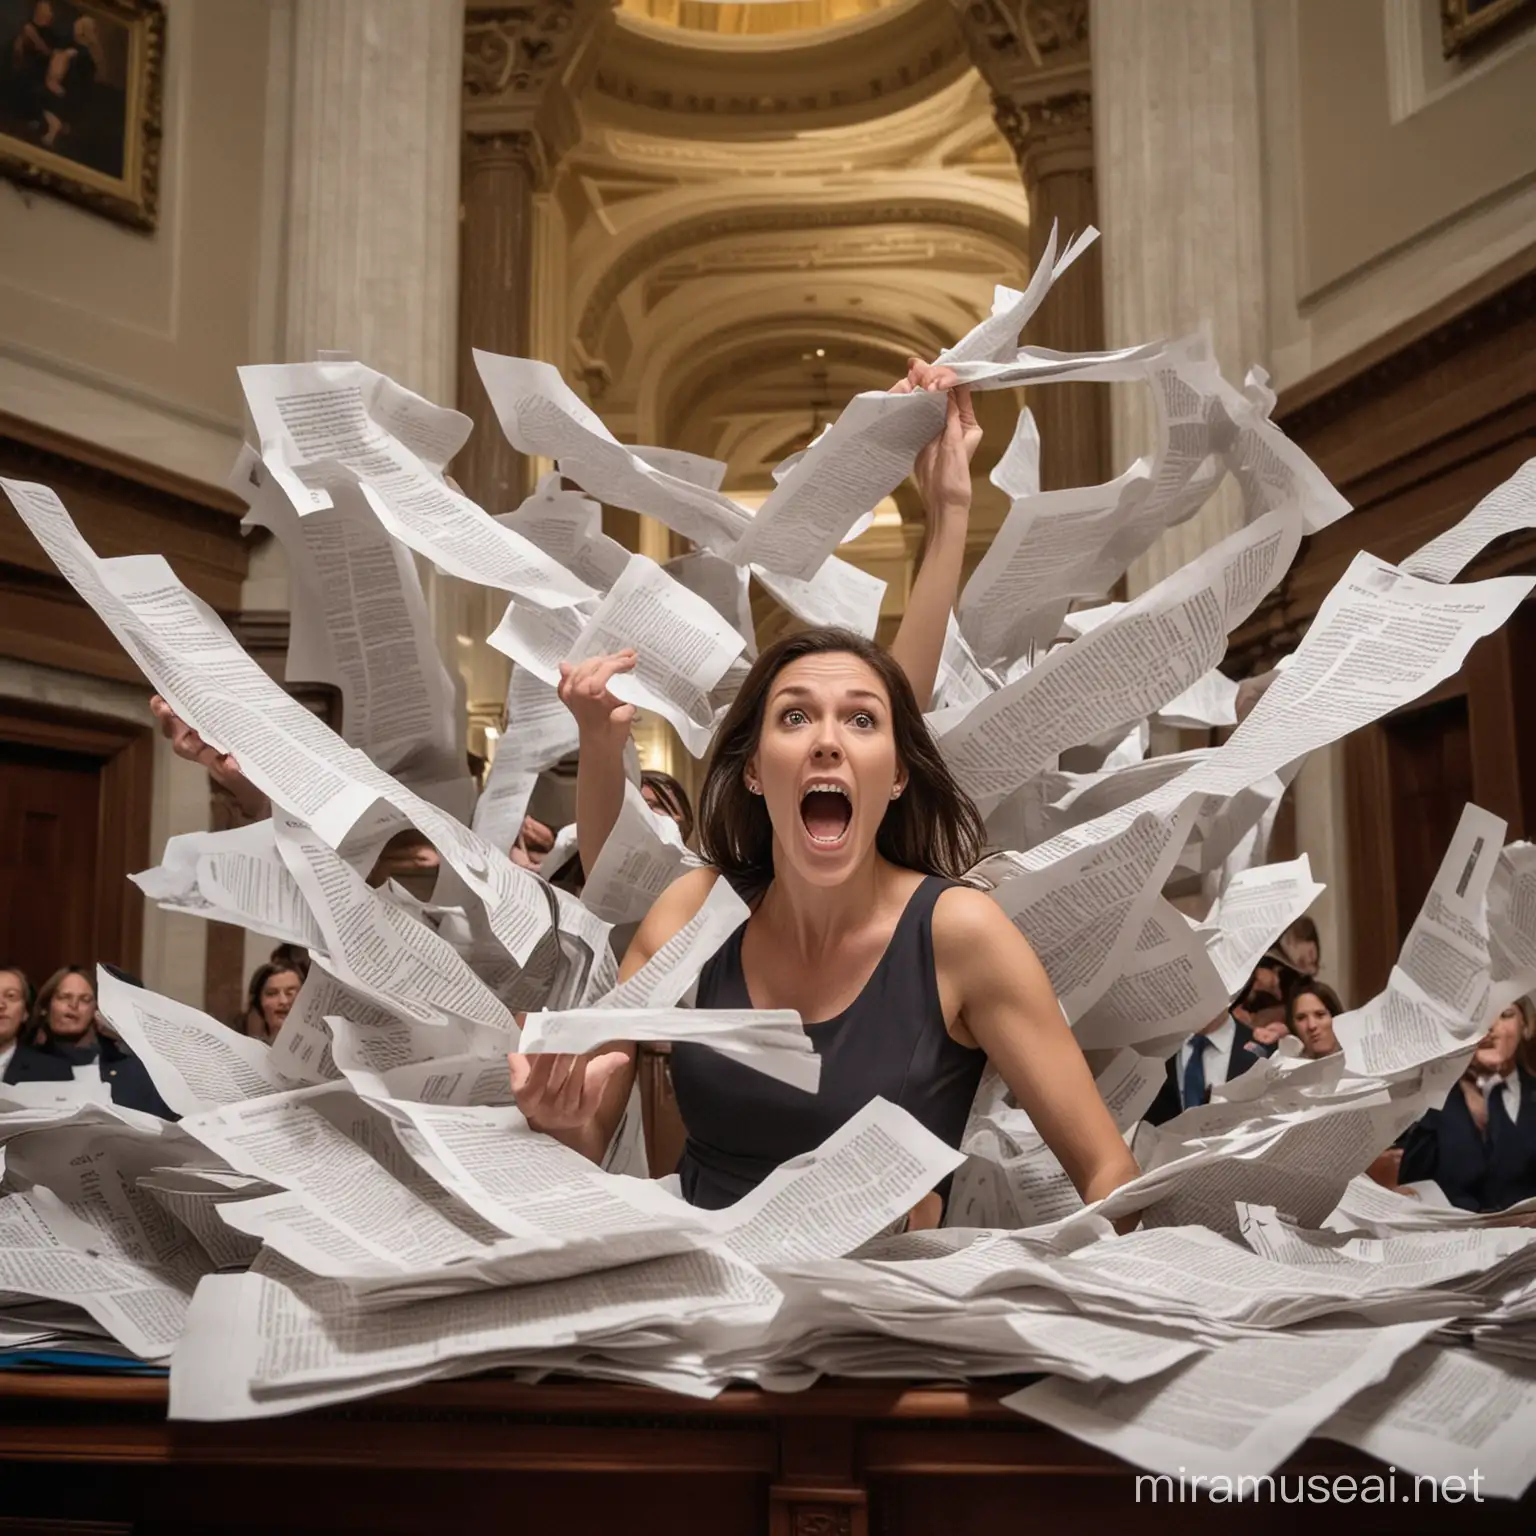 Woman with Extra Arms Holding Papers in US Senate